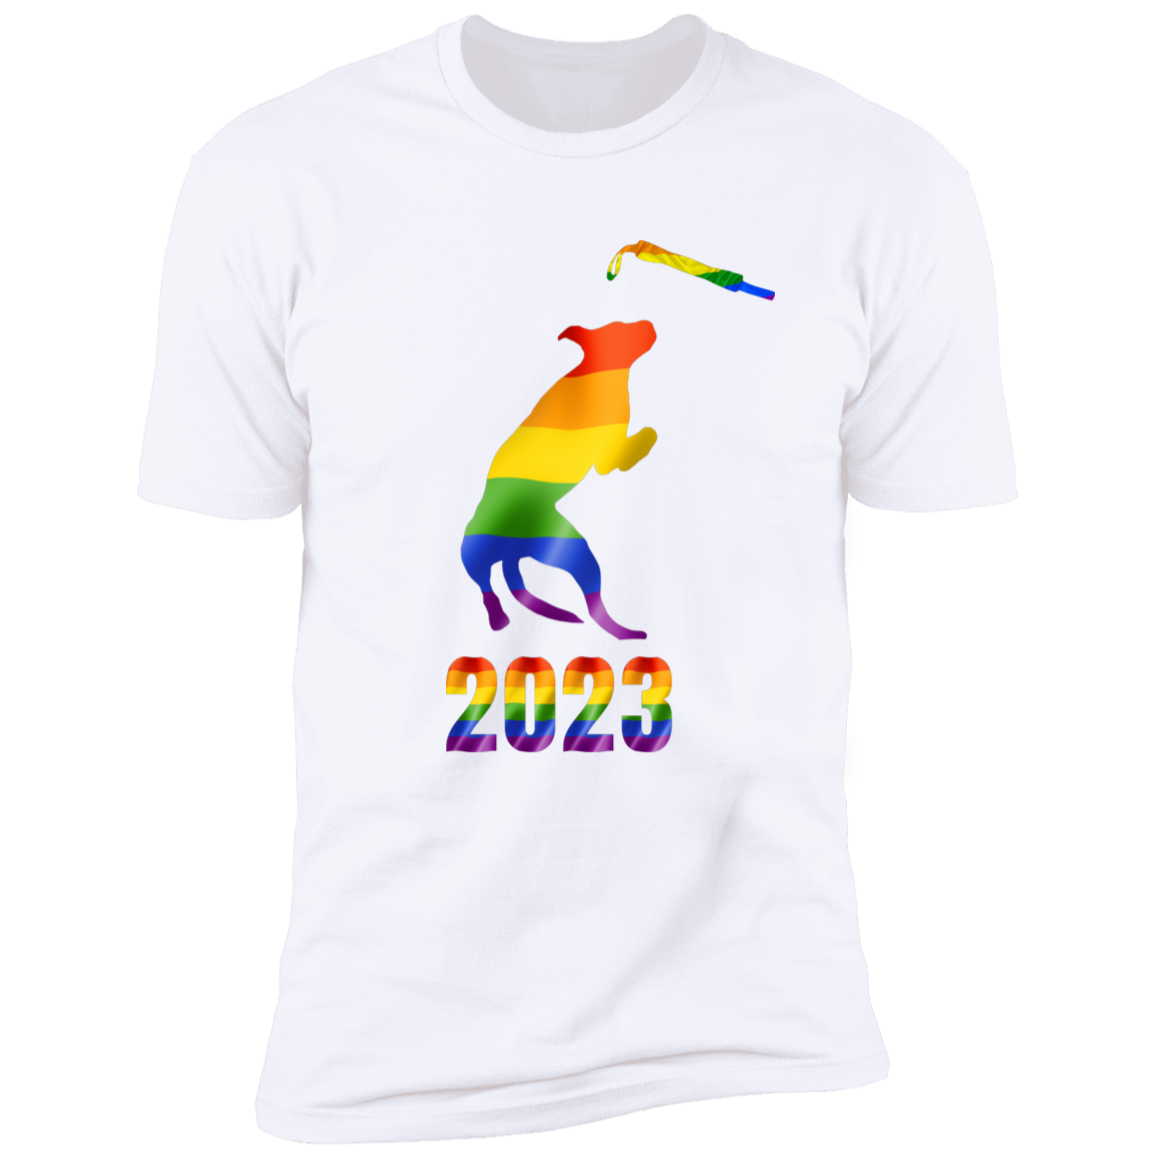 Dock Diving Pride 2023, Dog dock diving shirt for humas, in white